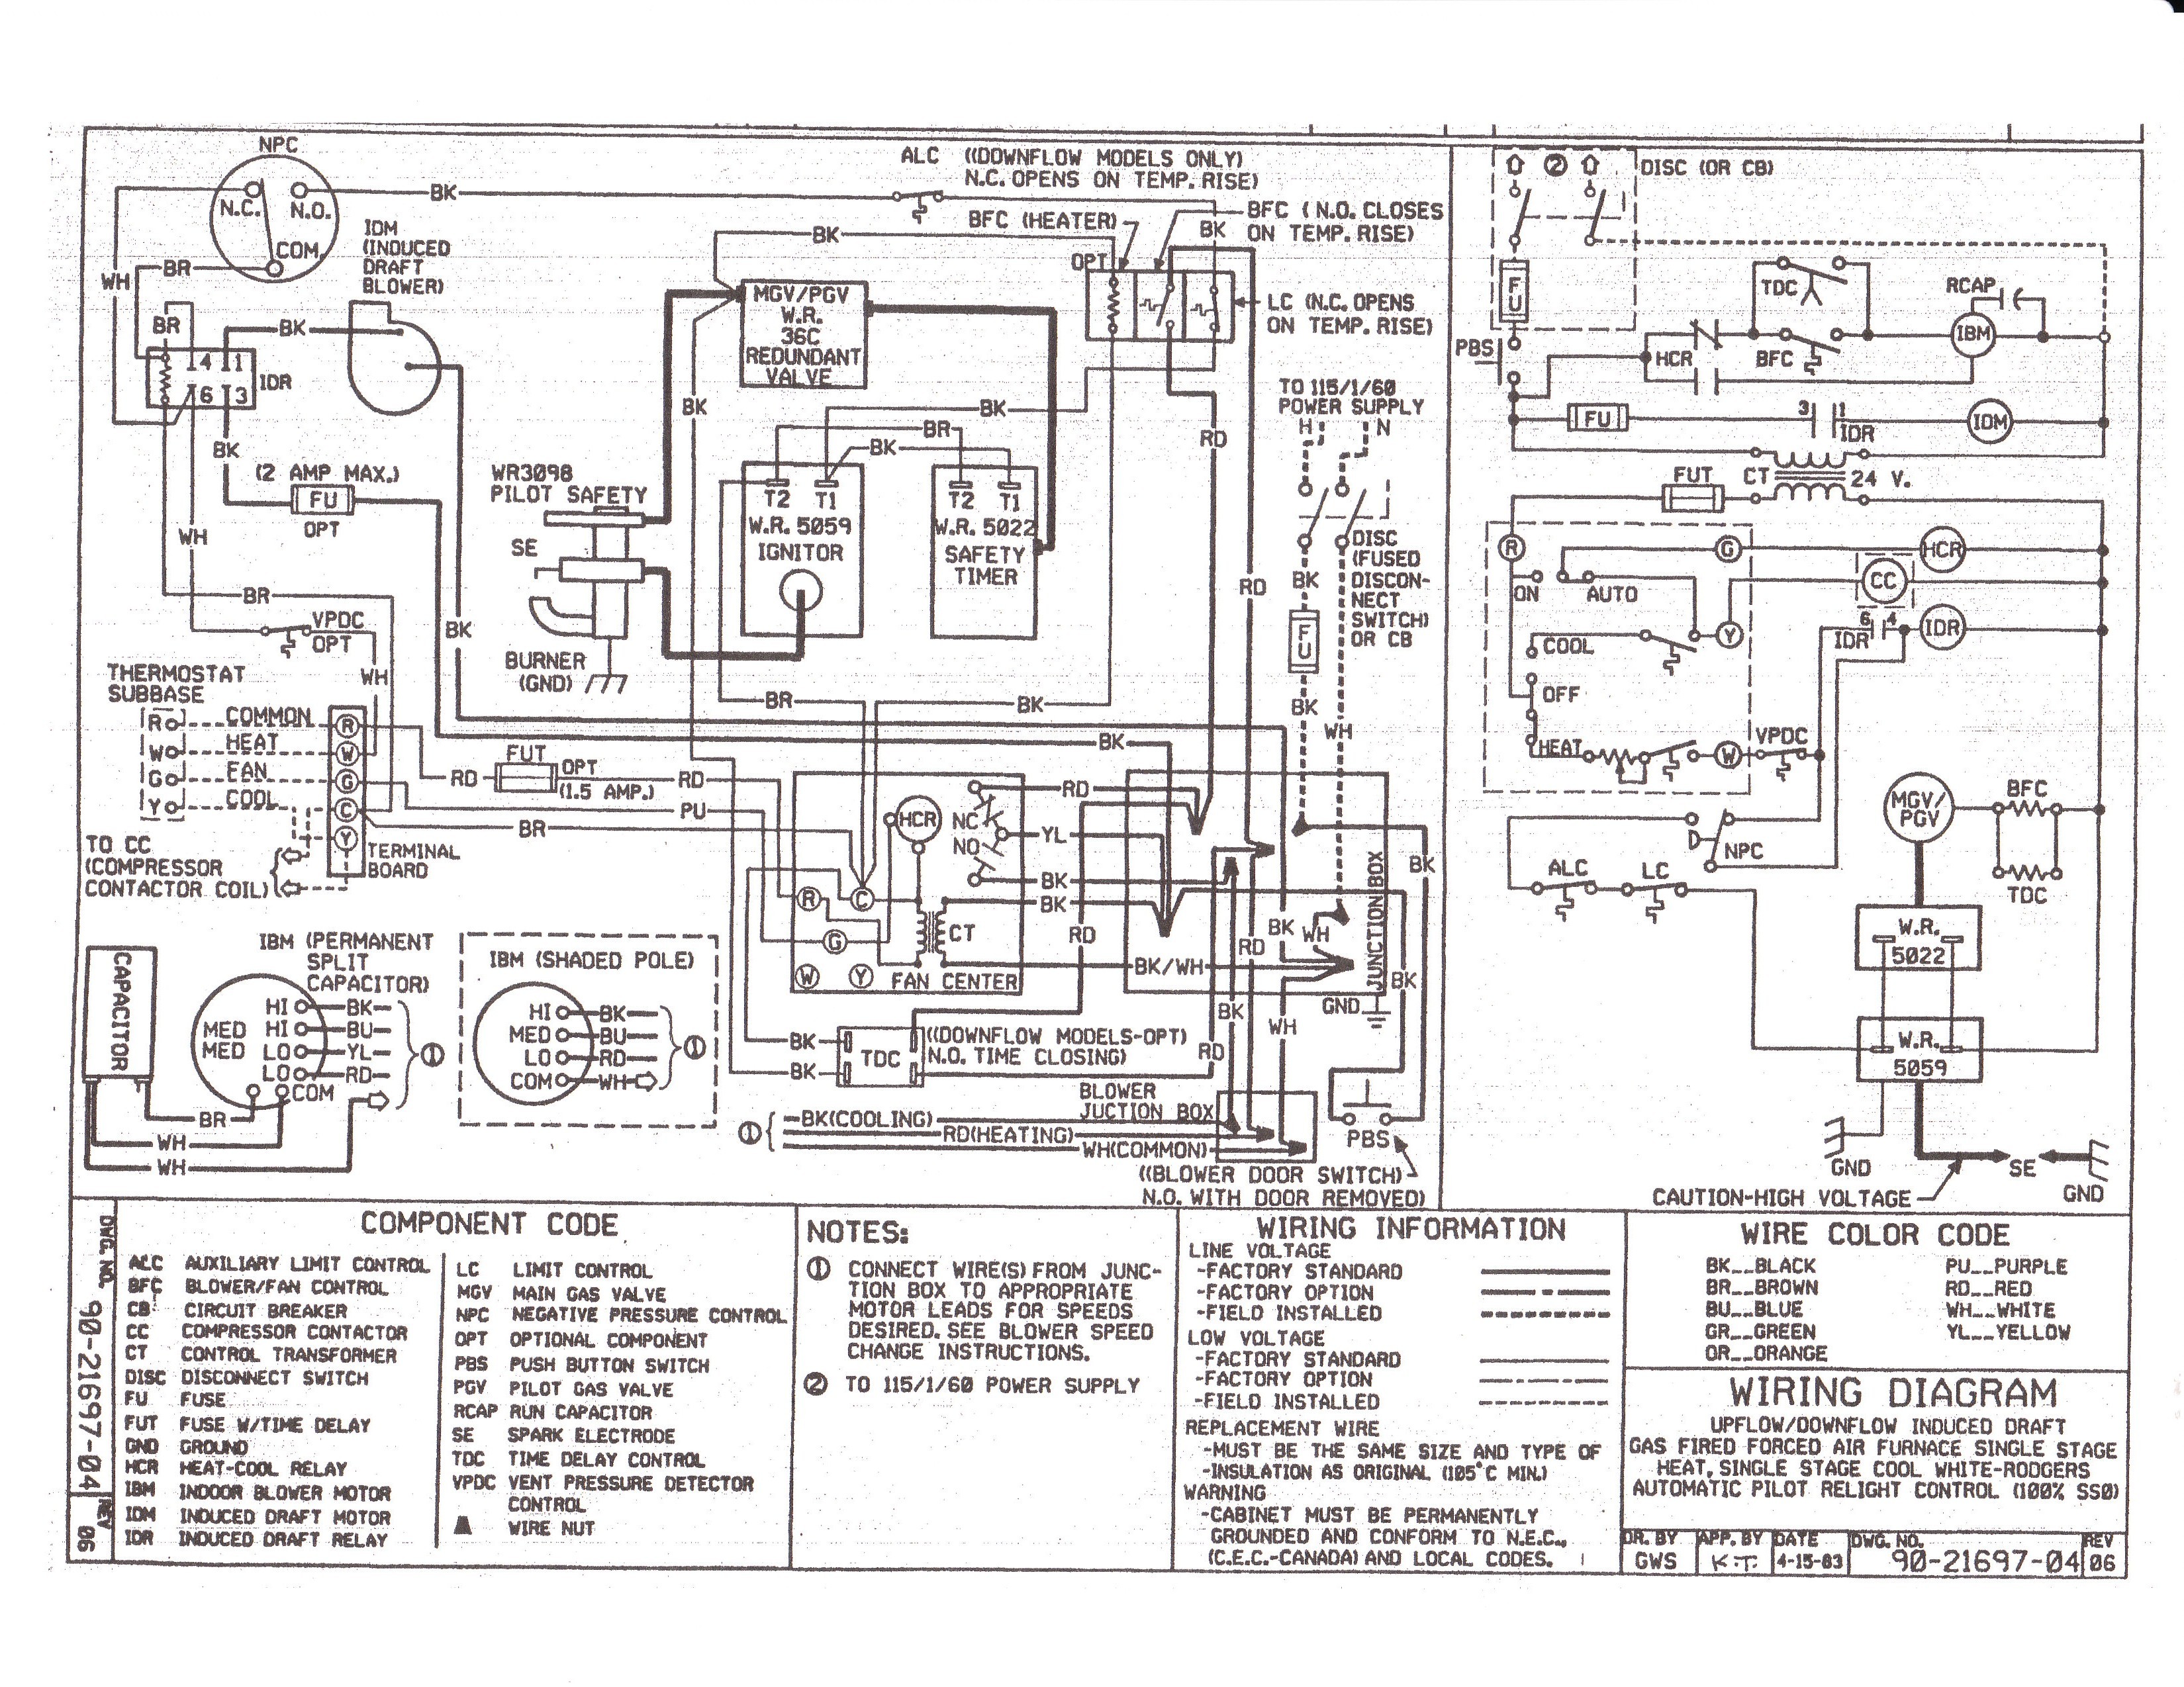 Lovely Intertherm Electric Furnace Wiring Diagram 62 With Additional Jvc Kd R610 Wiring Diagram with Intertherm Electric Furnace Wiring Diagram